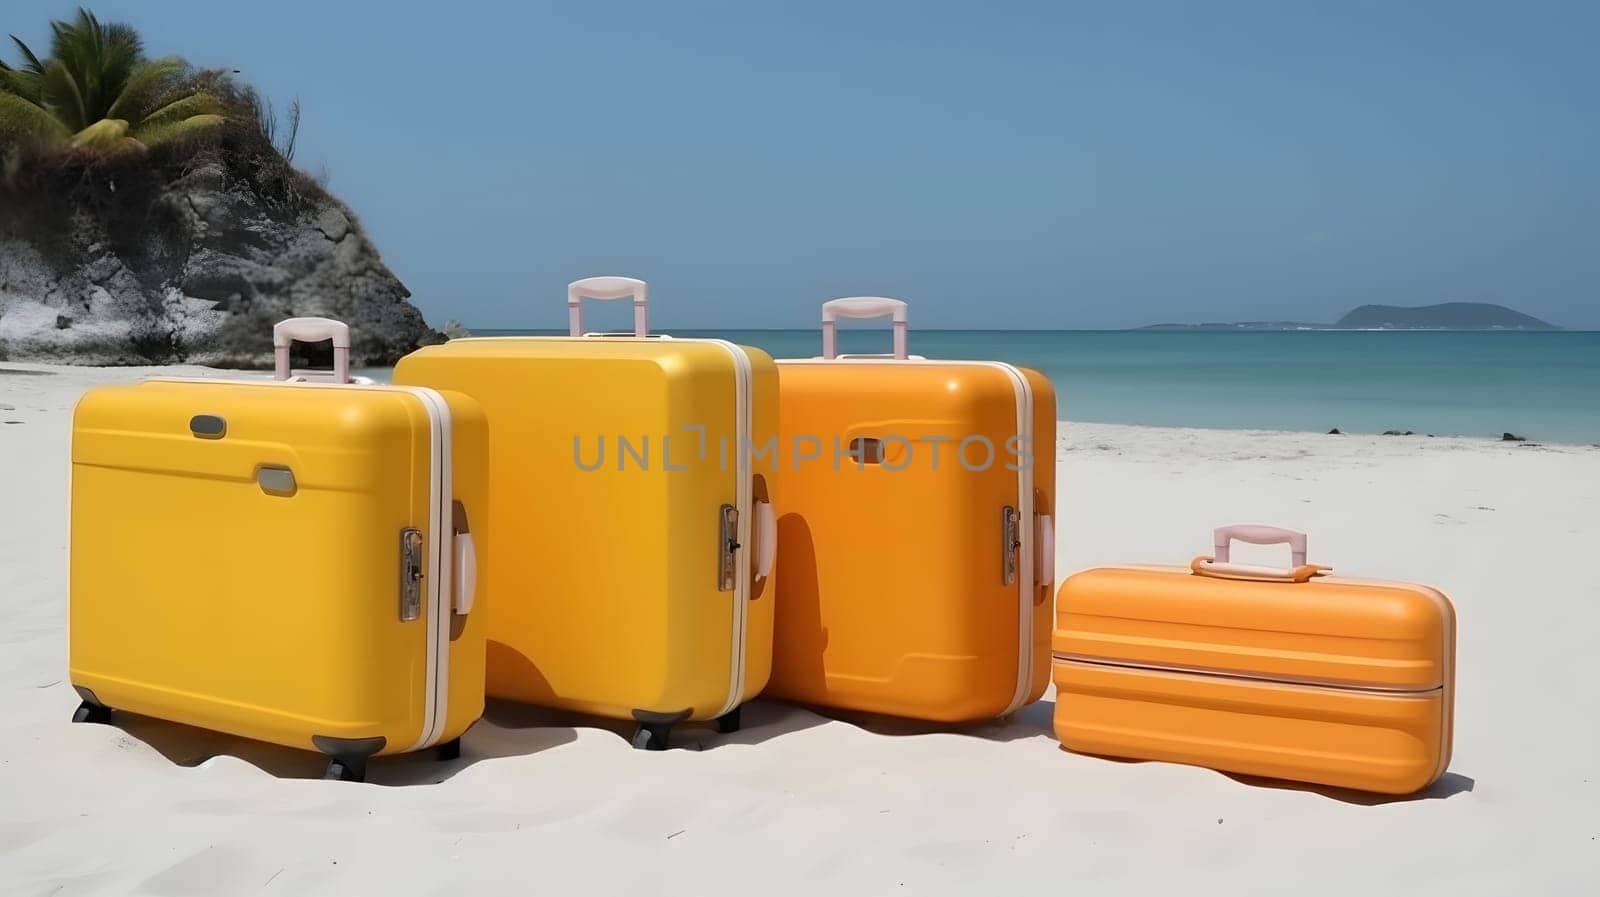 Few modern yellow suitcases on tropical resort beach at sunny day. Neural network generated in May 2023. Not based on any actual person, scene or pattern.